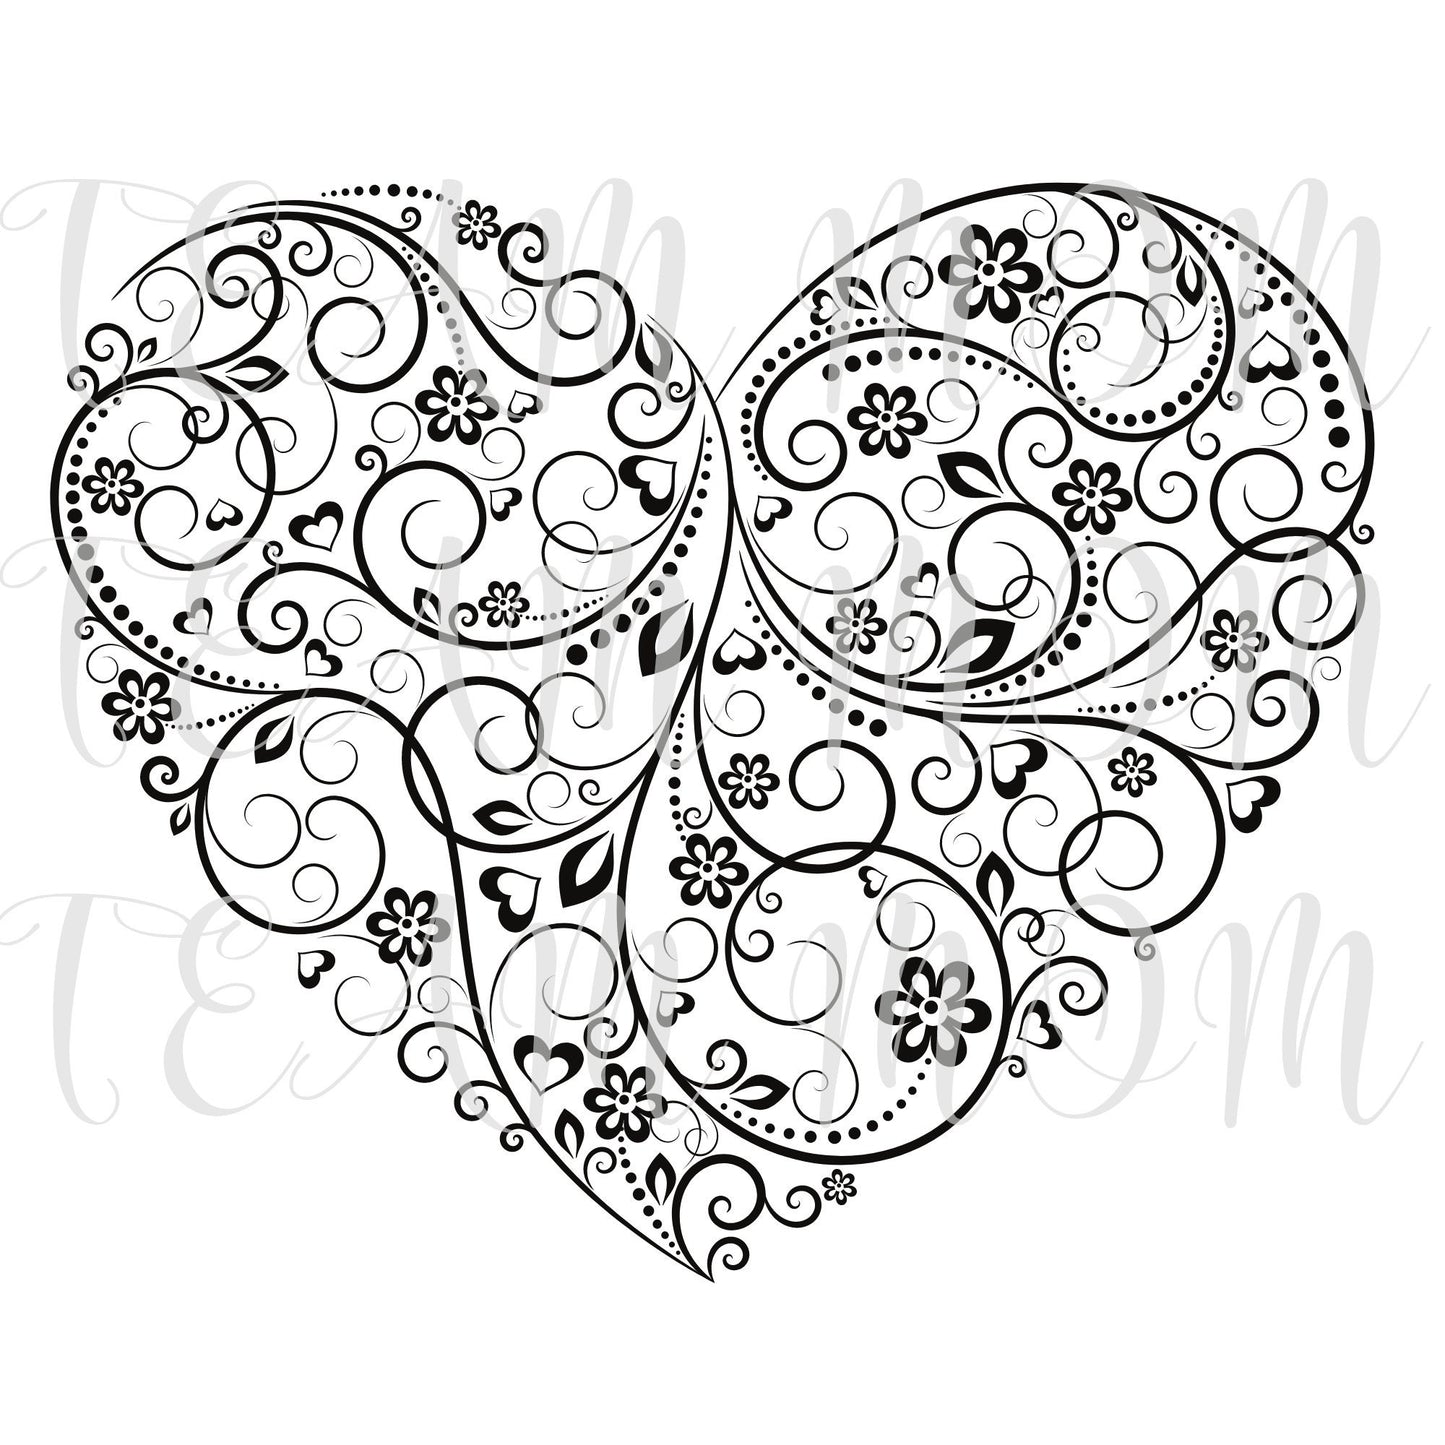 Heart svg, pretty heart svg, floral heart svg, heart with paisleys svg, valentines day svg, swirly heart svg